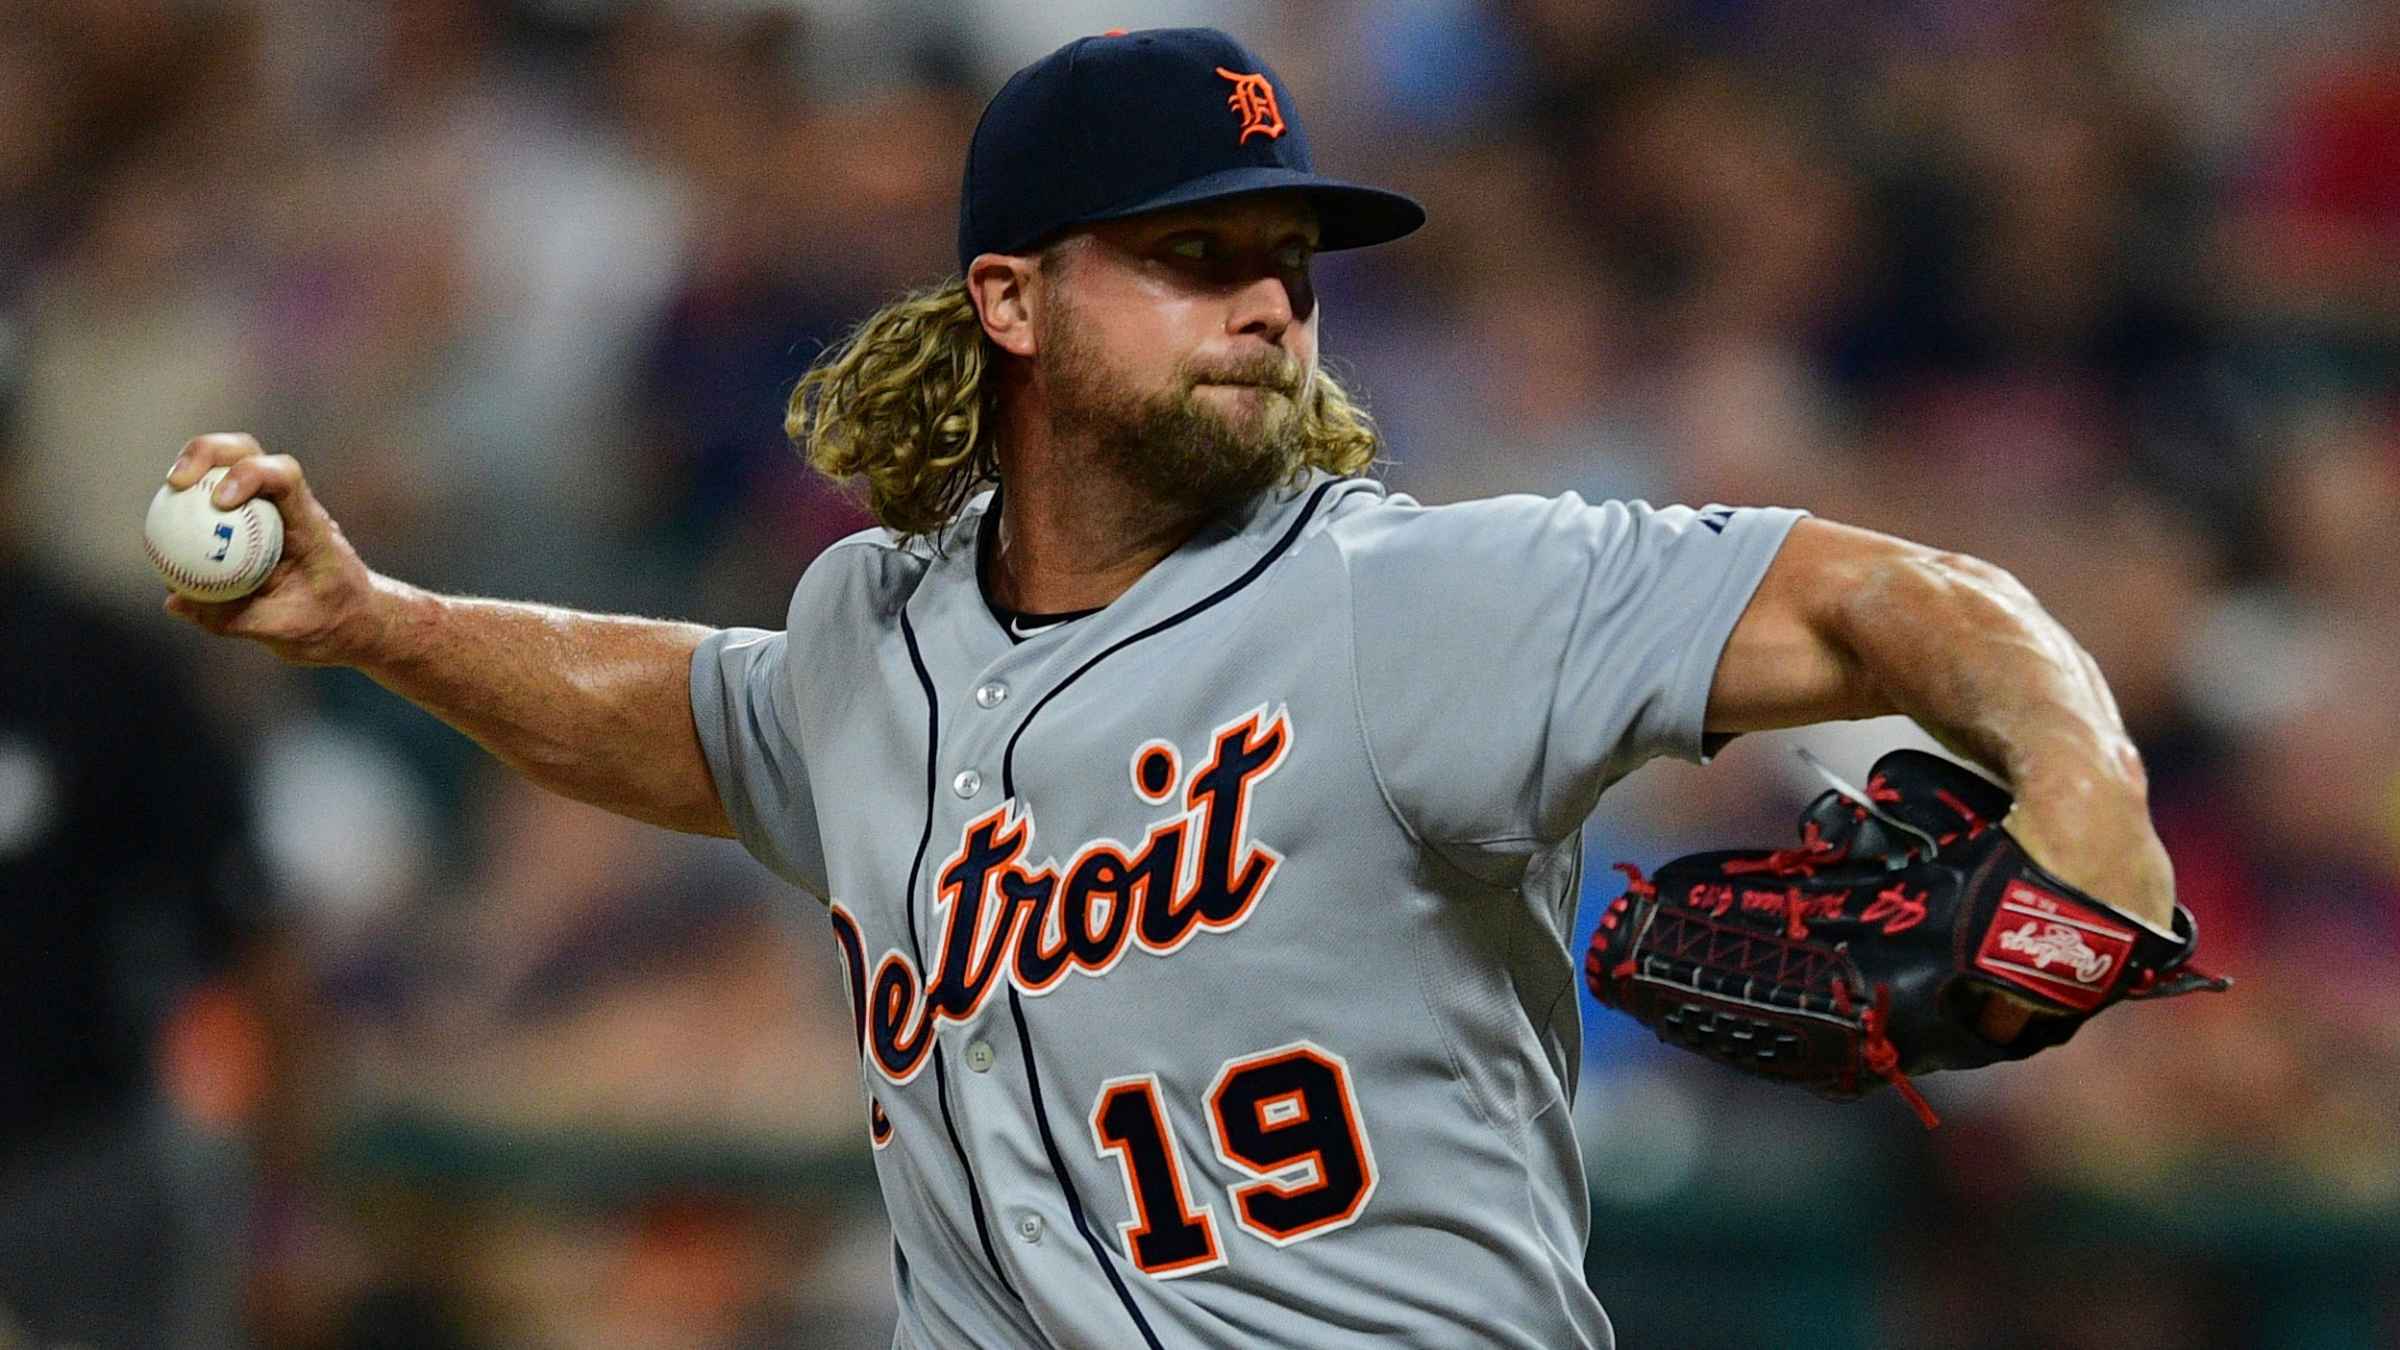 After MLB lockout ends, Tigers set to start training Sunday at Tigertown